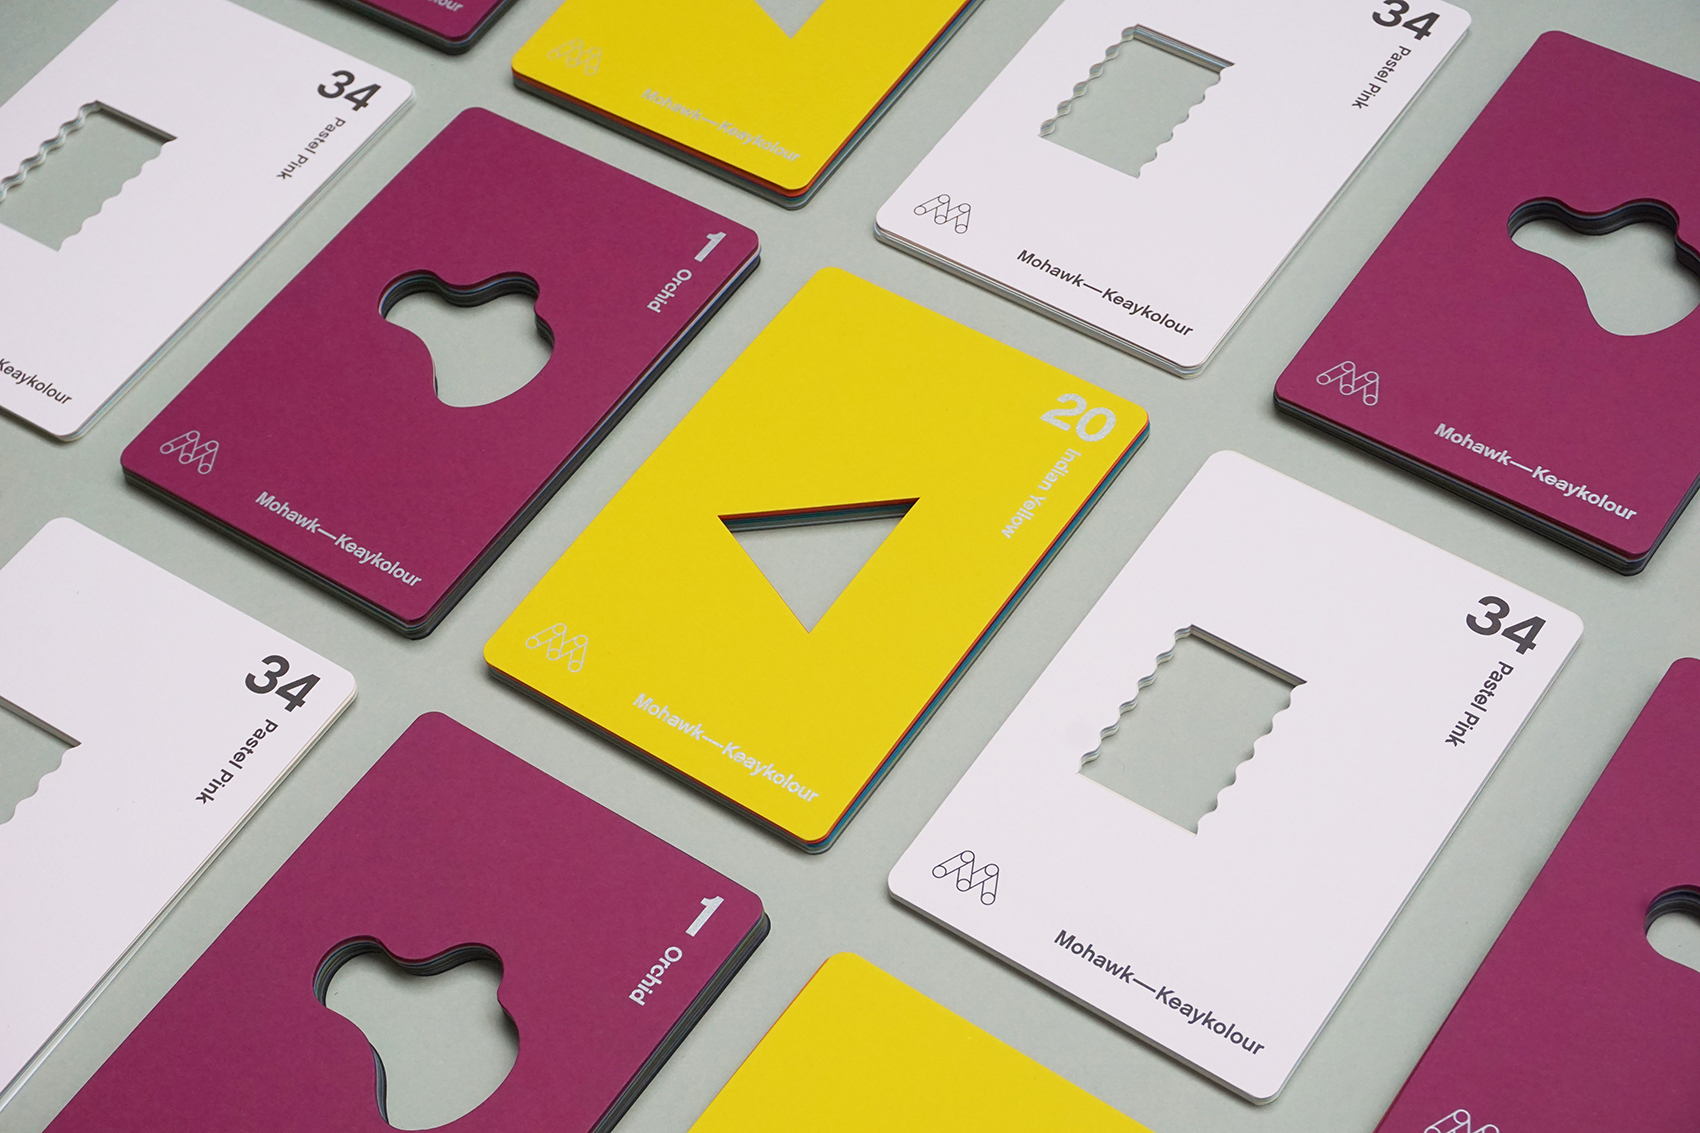 Purple, yellow, and white Keaykolour selector cards arranged in a grid pattern